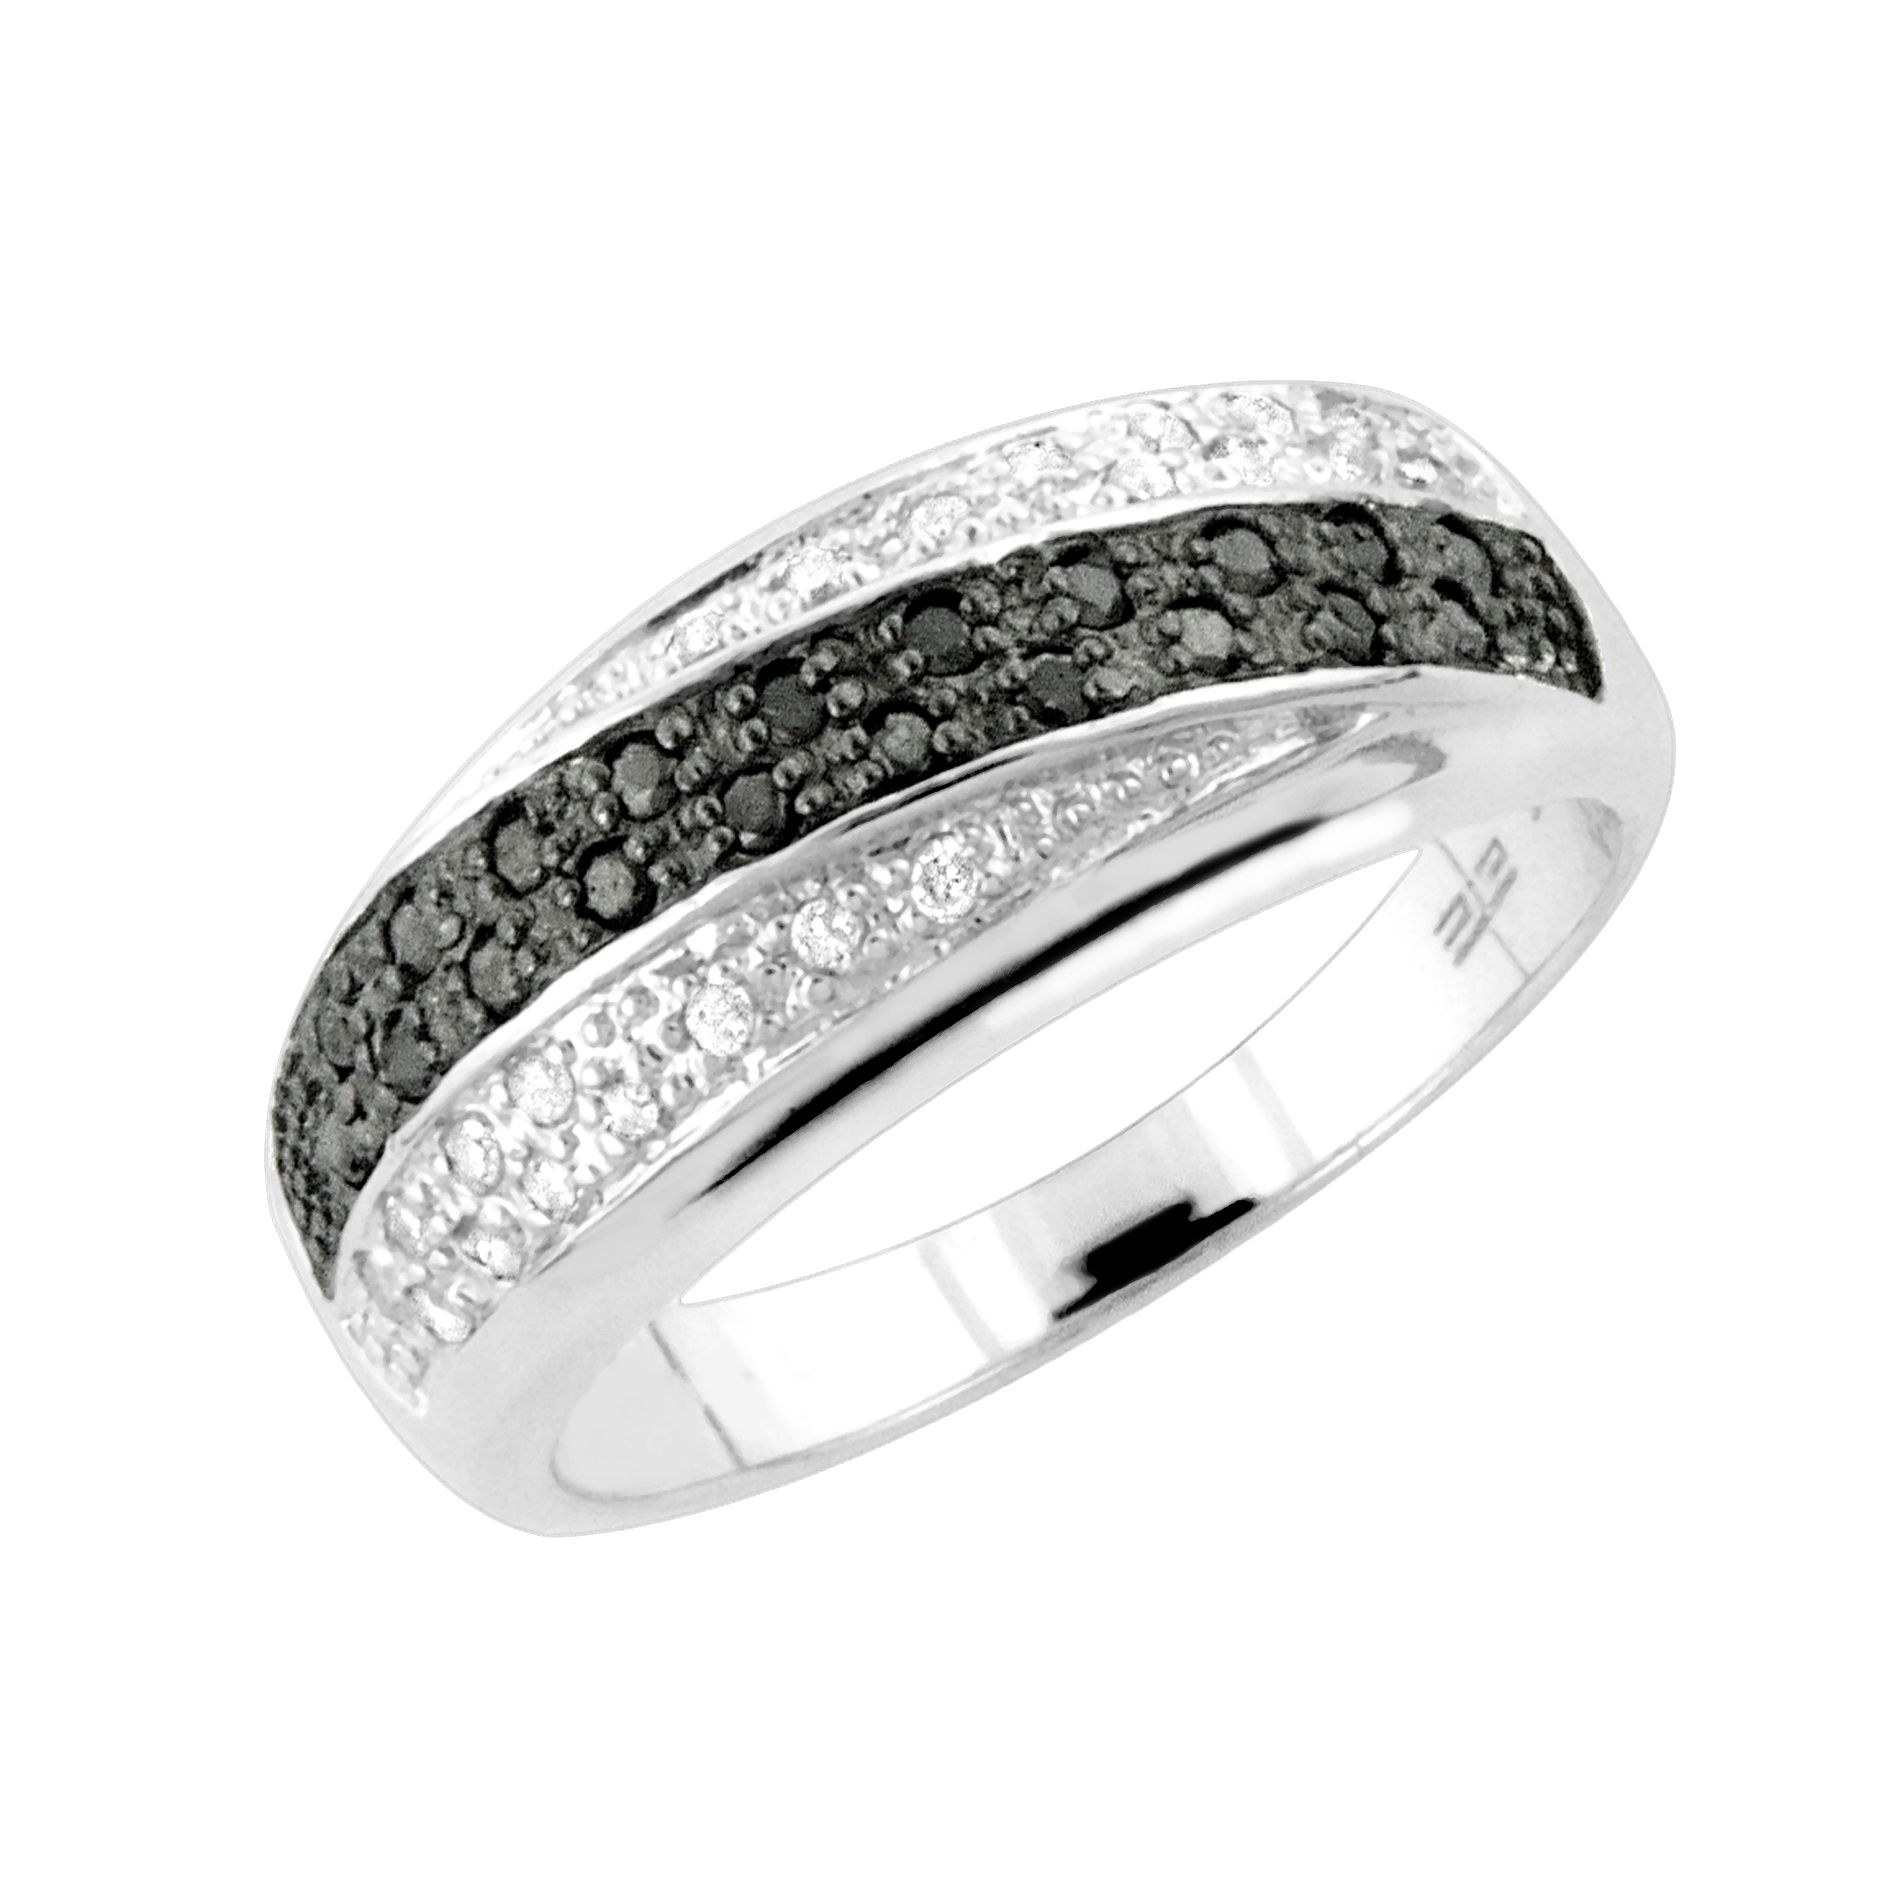 1/4 cttw Black and White Diamond Dome Ring - Size 7 Only